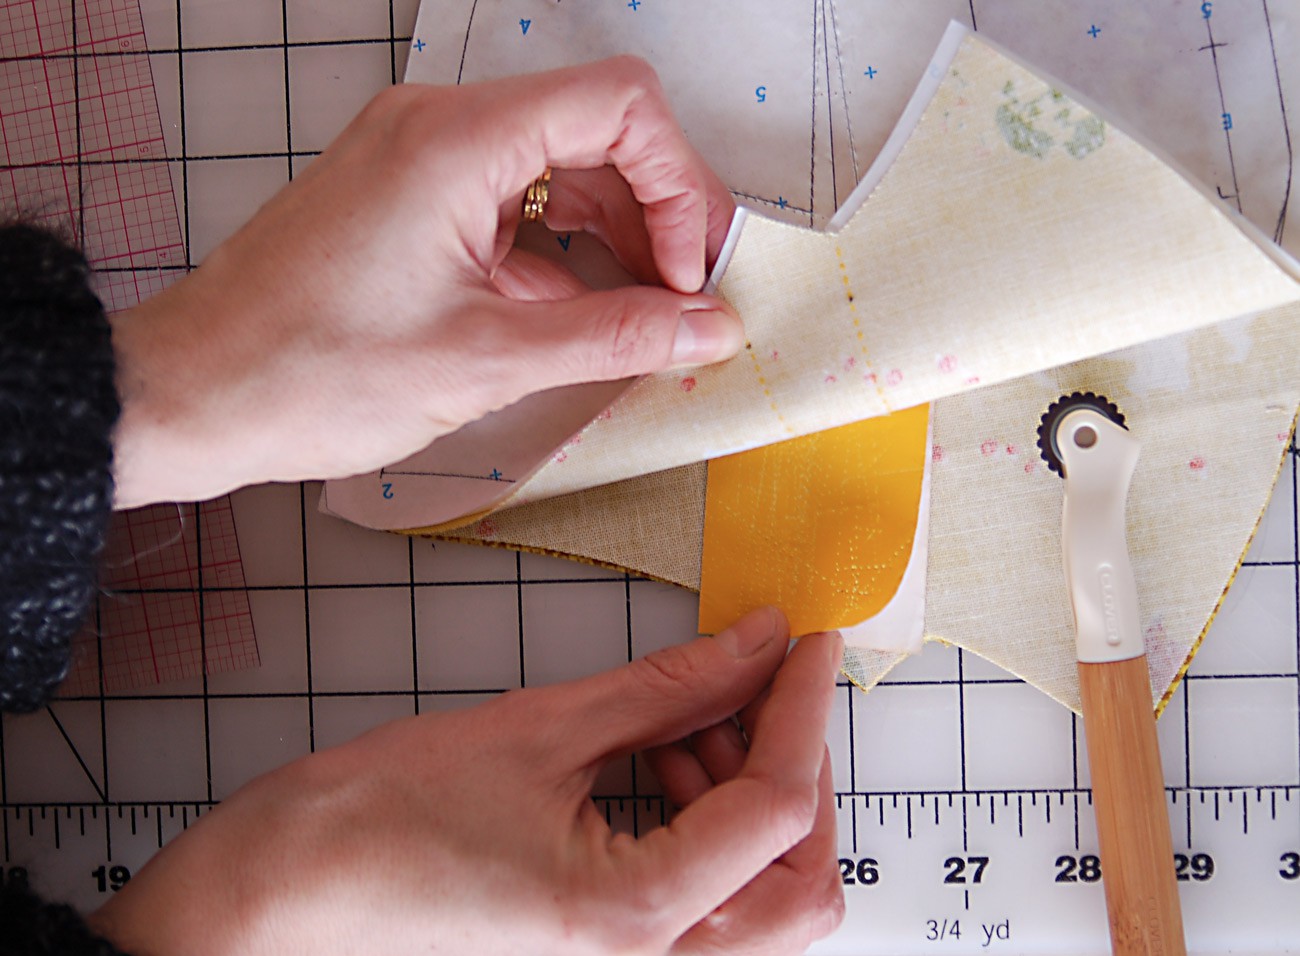 Tilly and the Buttons: How to Cut Fabric Without Cutting Your